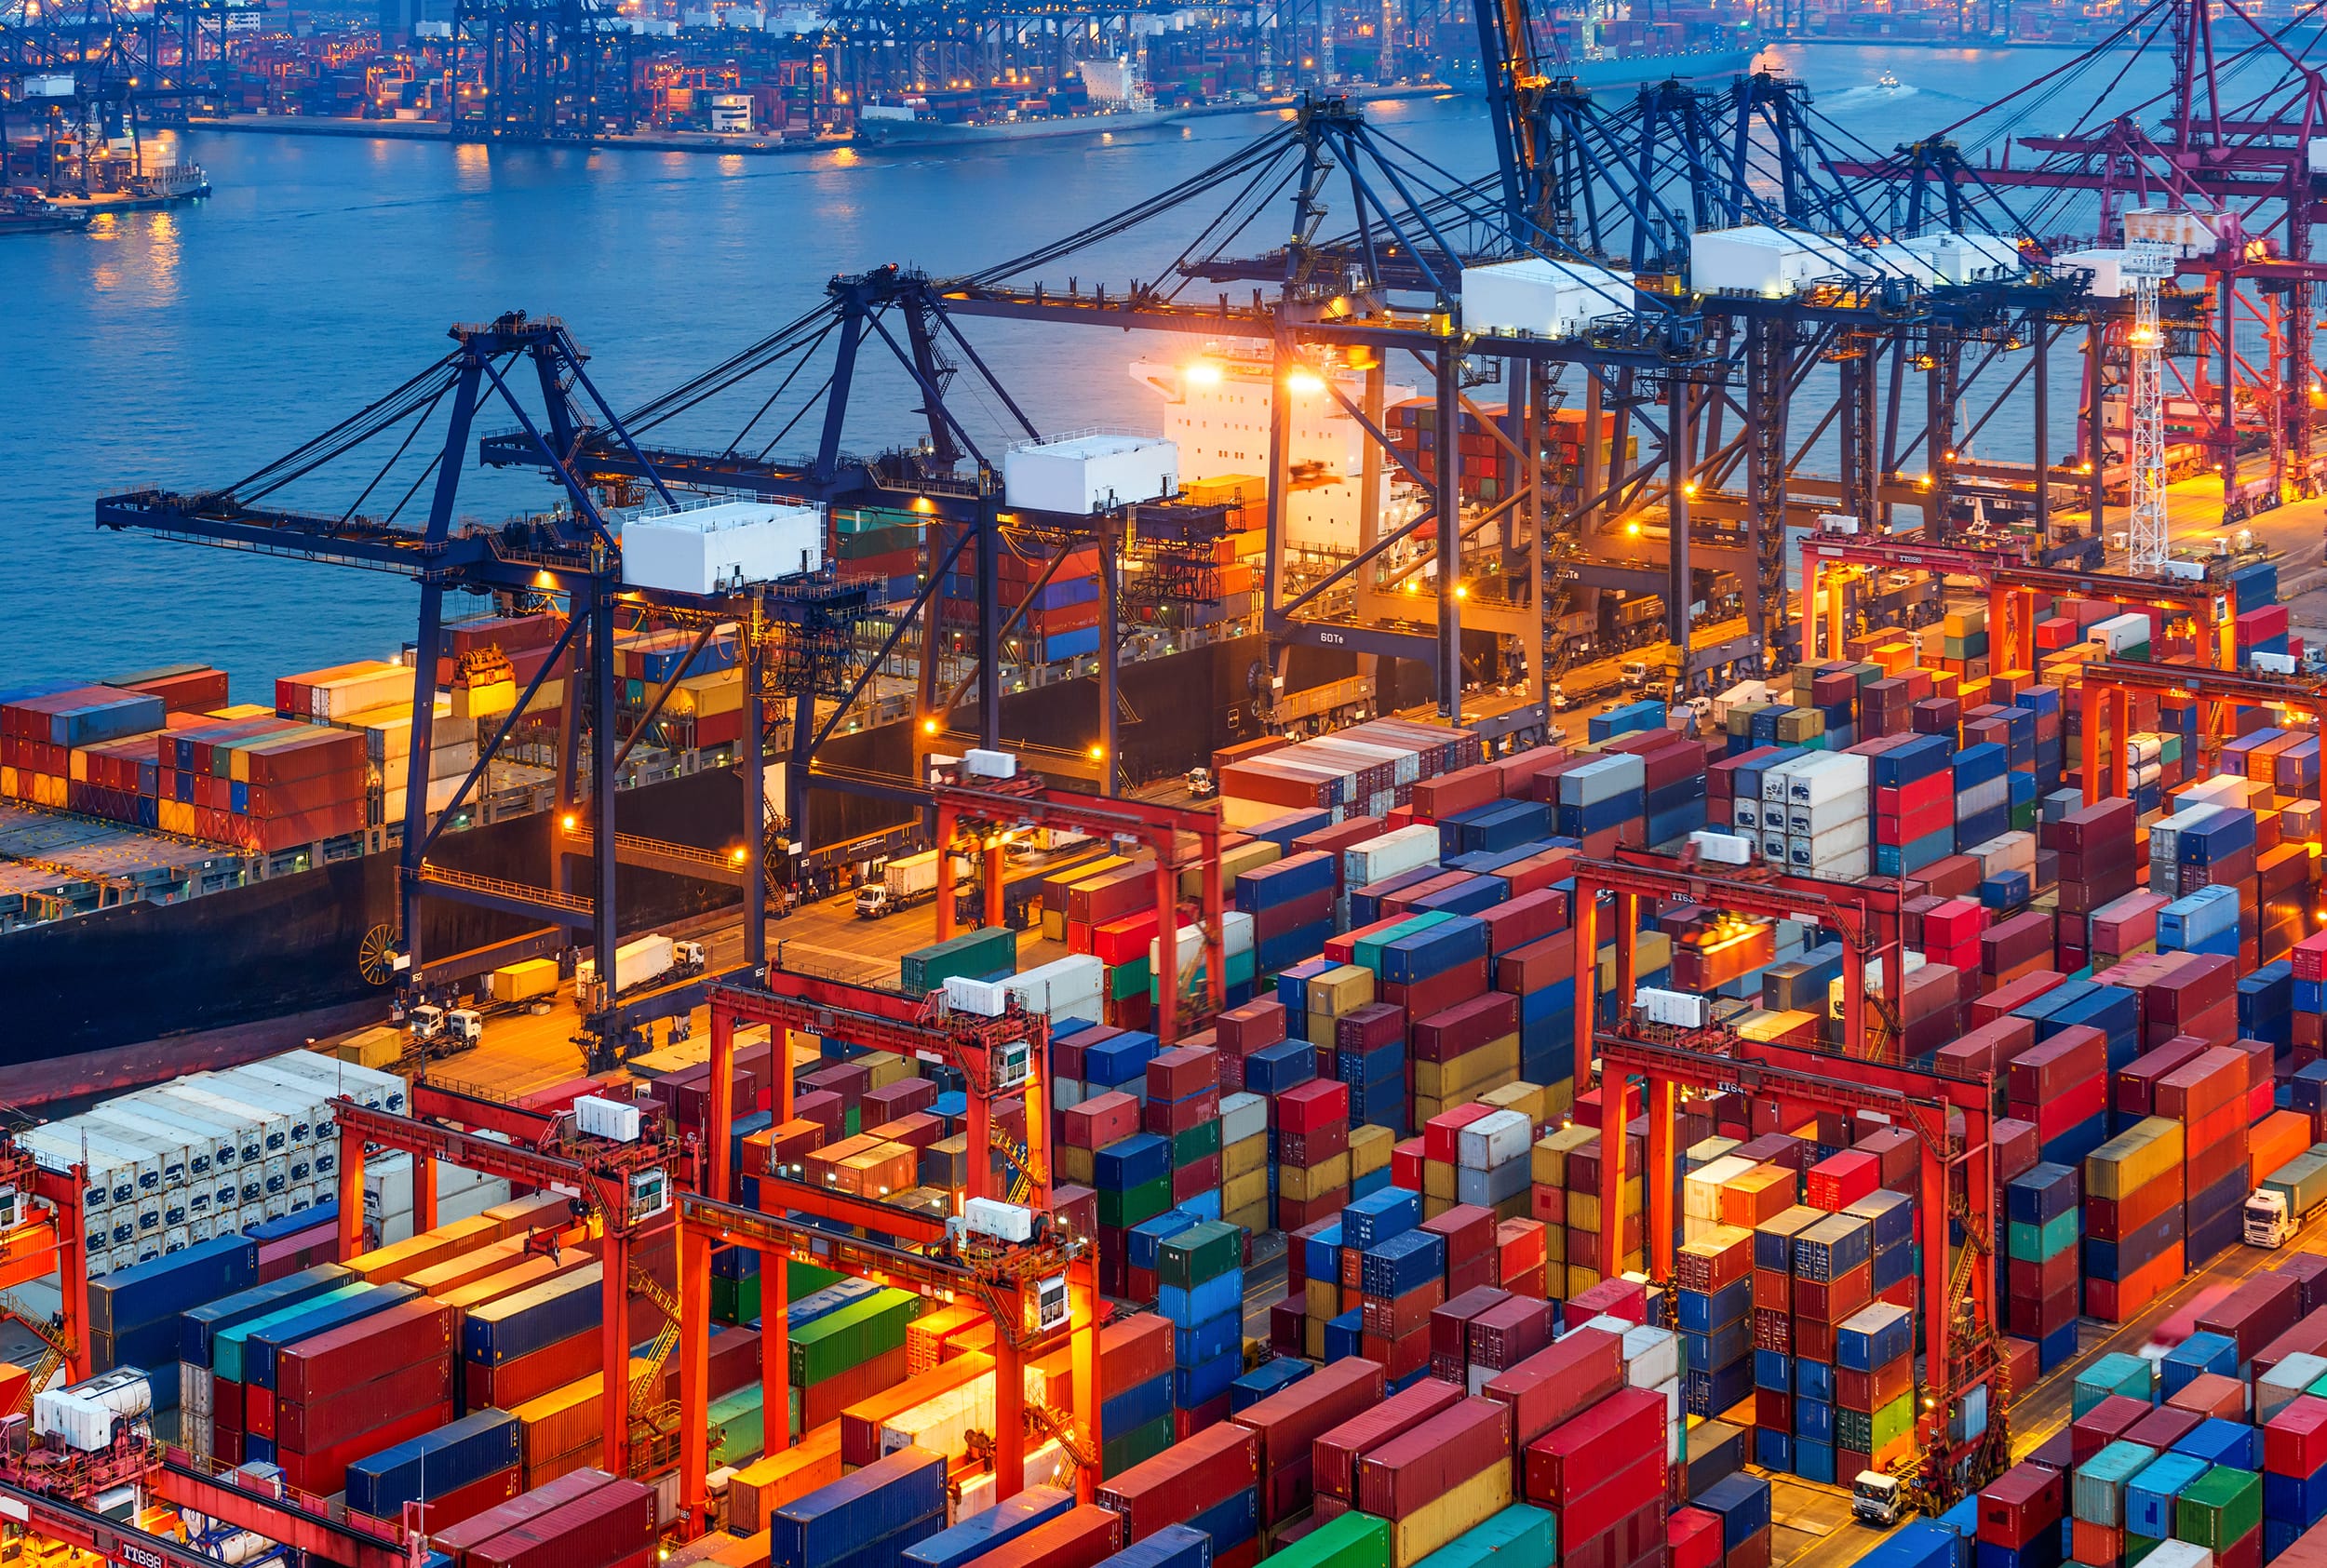 industrial port with containers; Shutterstock ID 261748589; PO: GED Webseite; Job: 103/64119-133; Client: Bertelsmann Stiftung; Other: ST-NW, Erweiterte Premier-Lizenz